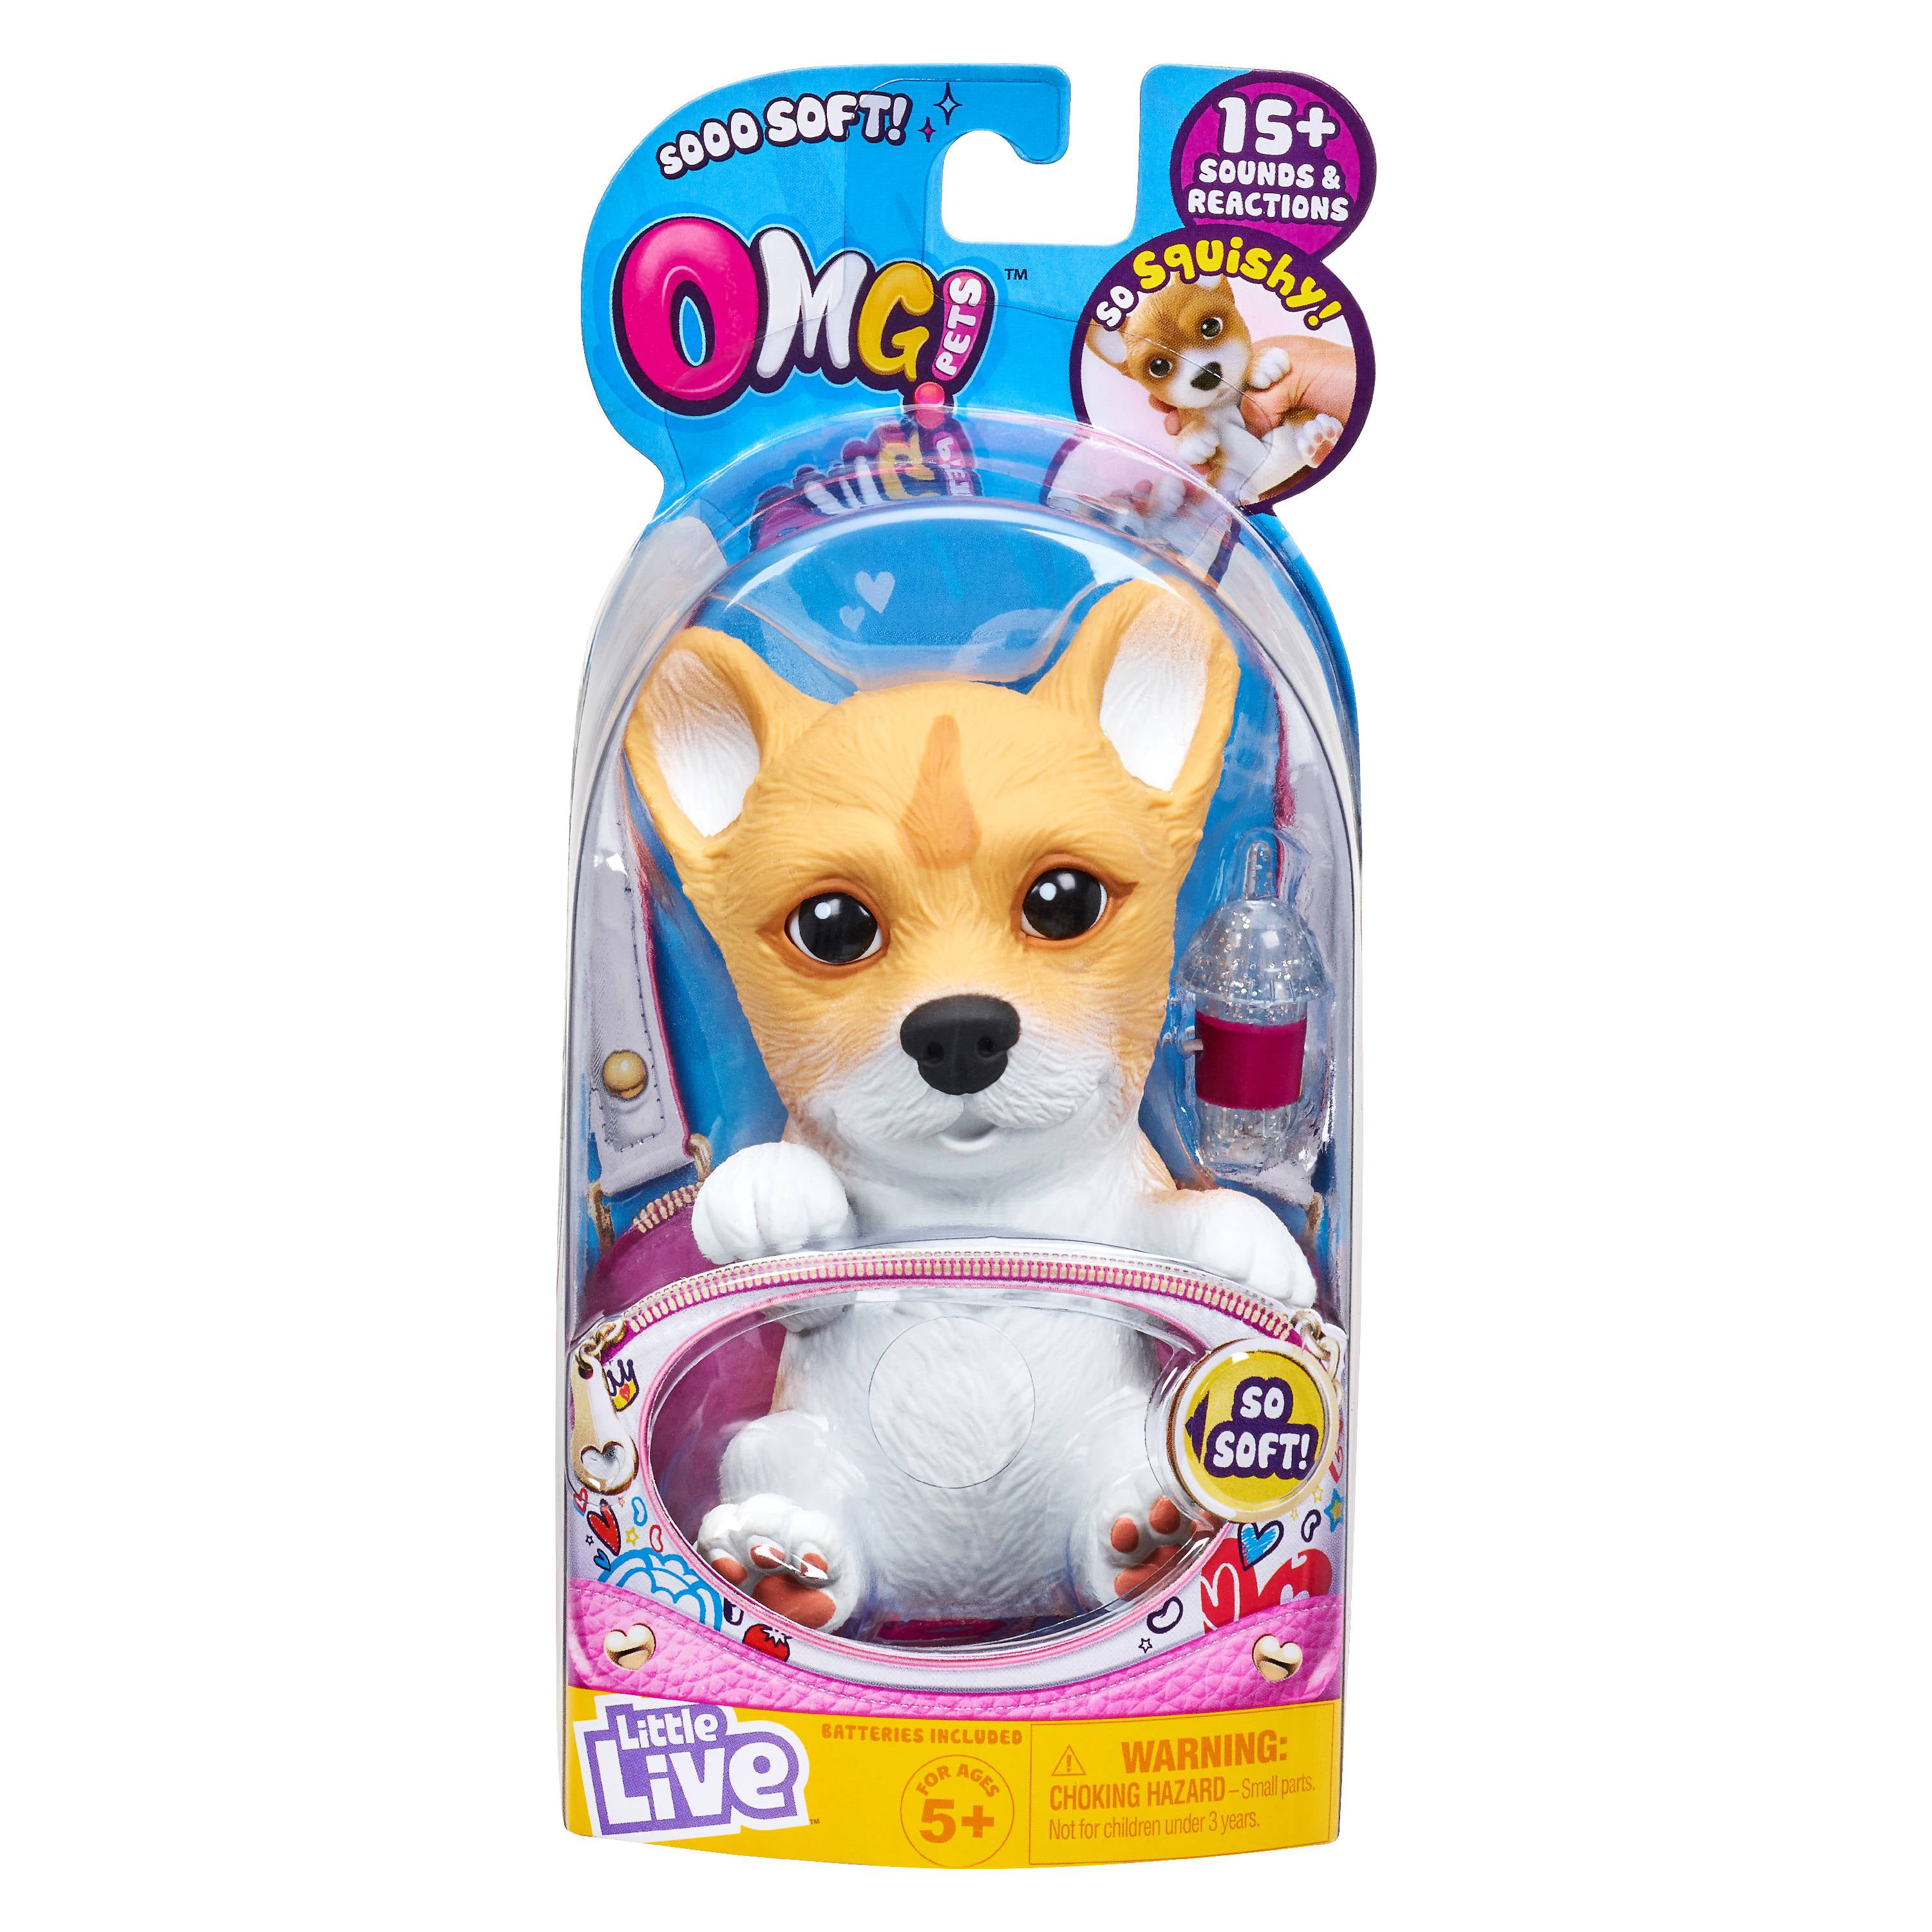 Little Live OMG Pets Soft Squishy Puppy Dog that Comes to ...